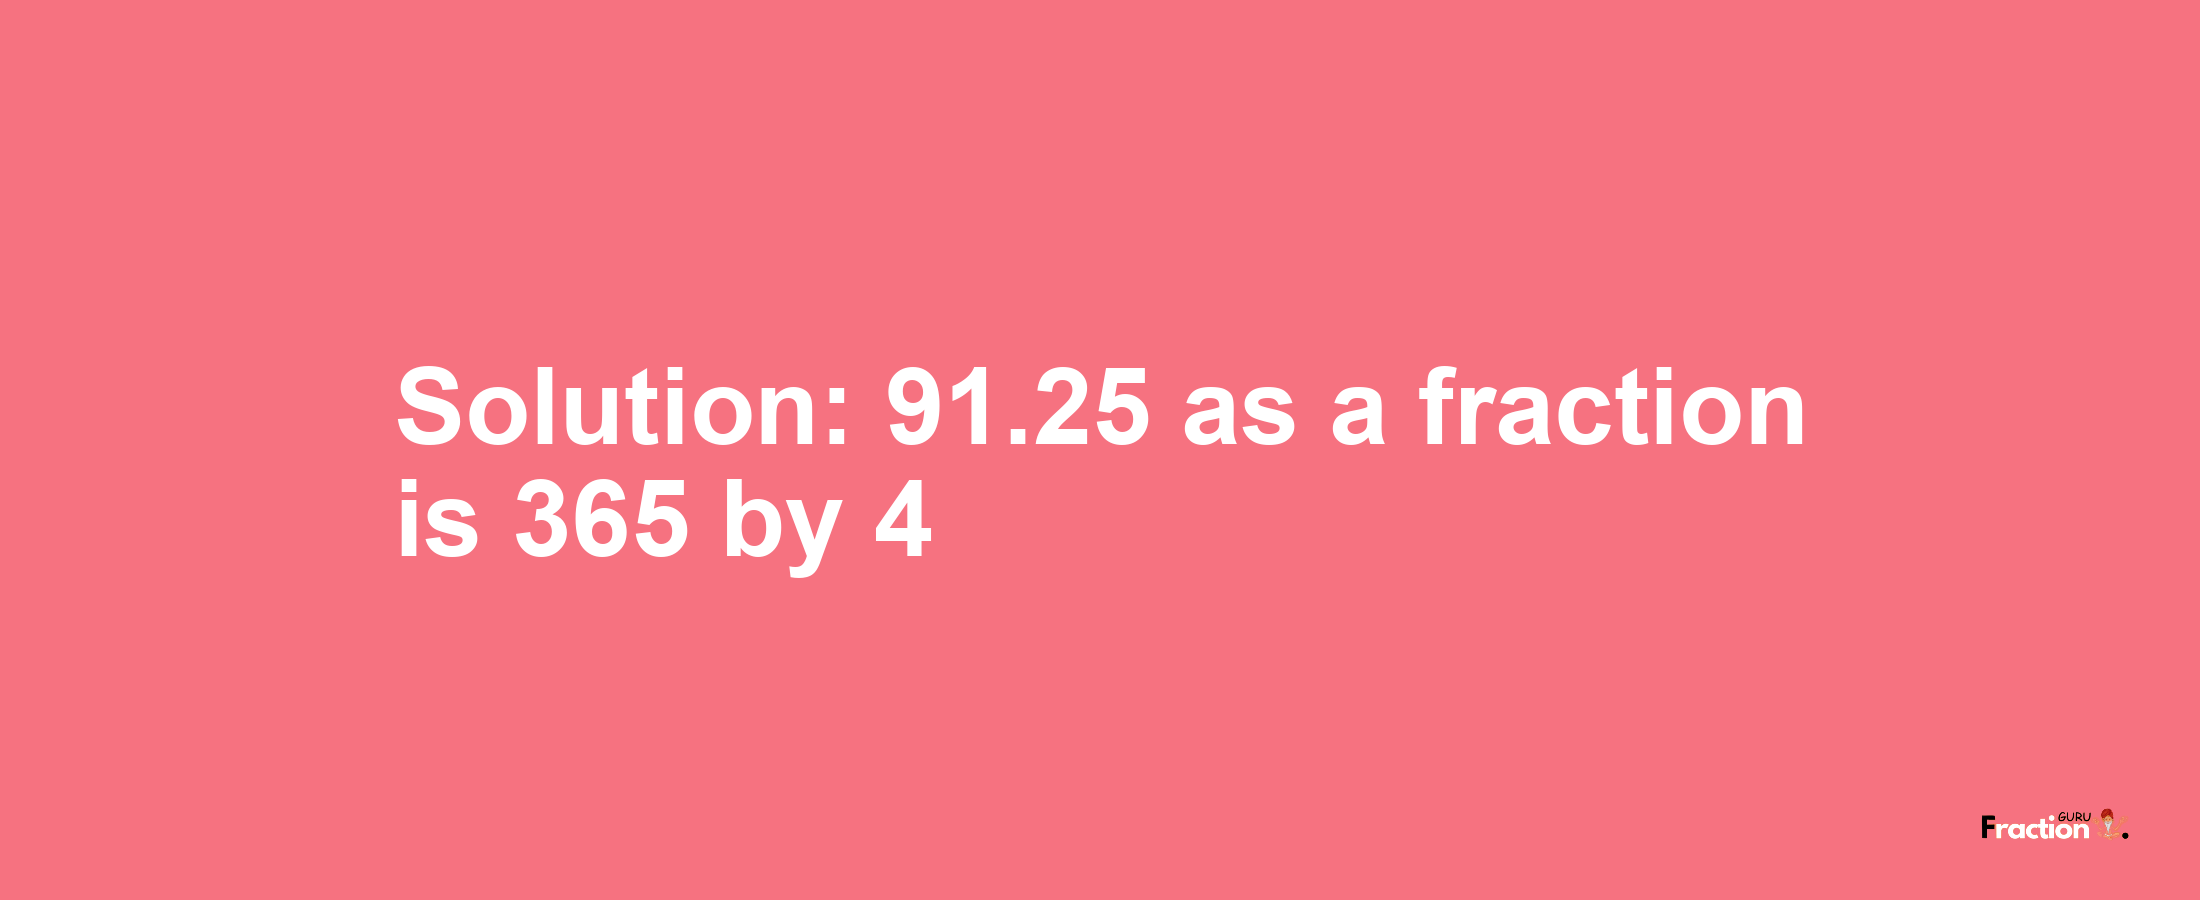 Solution:91.25 as a fraction is 365/4